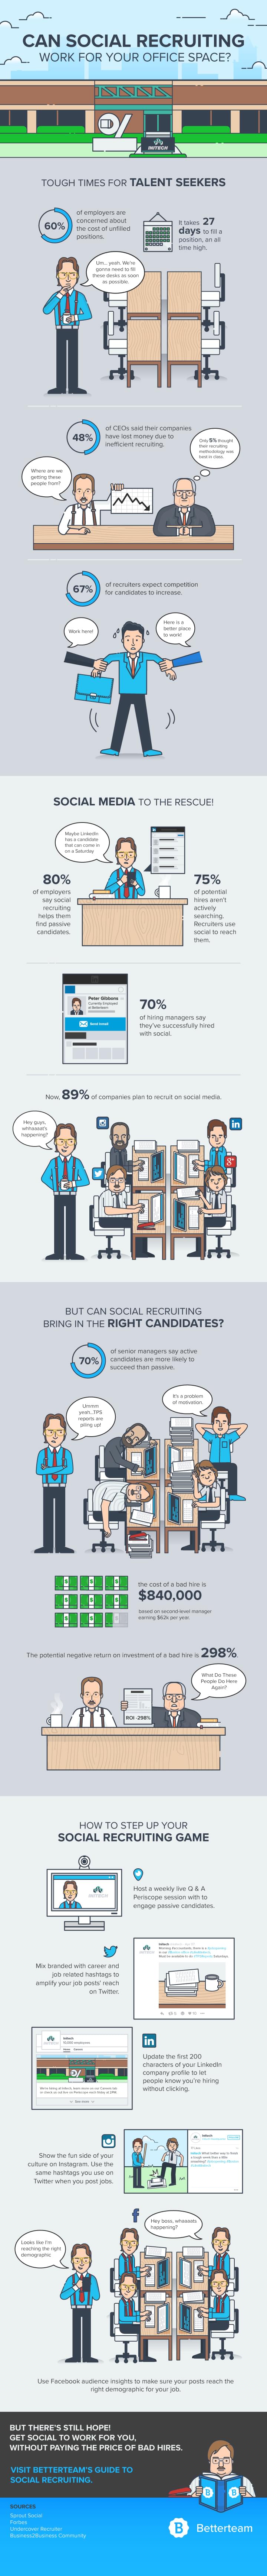 social recruiting infographic